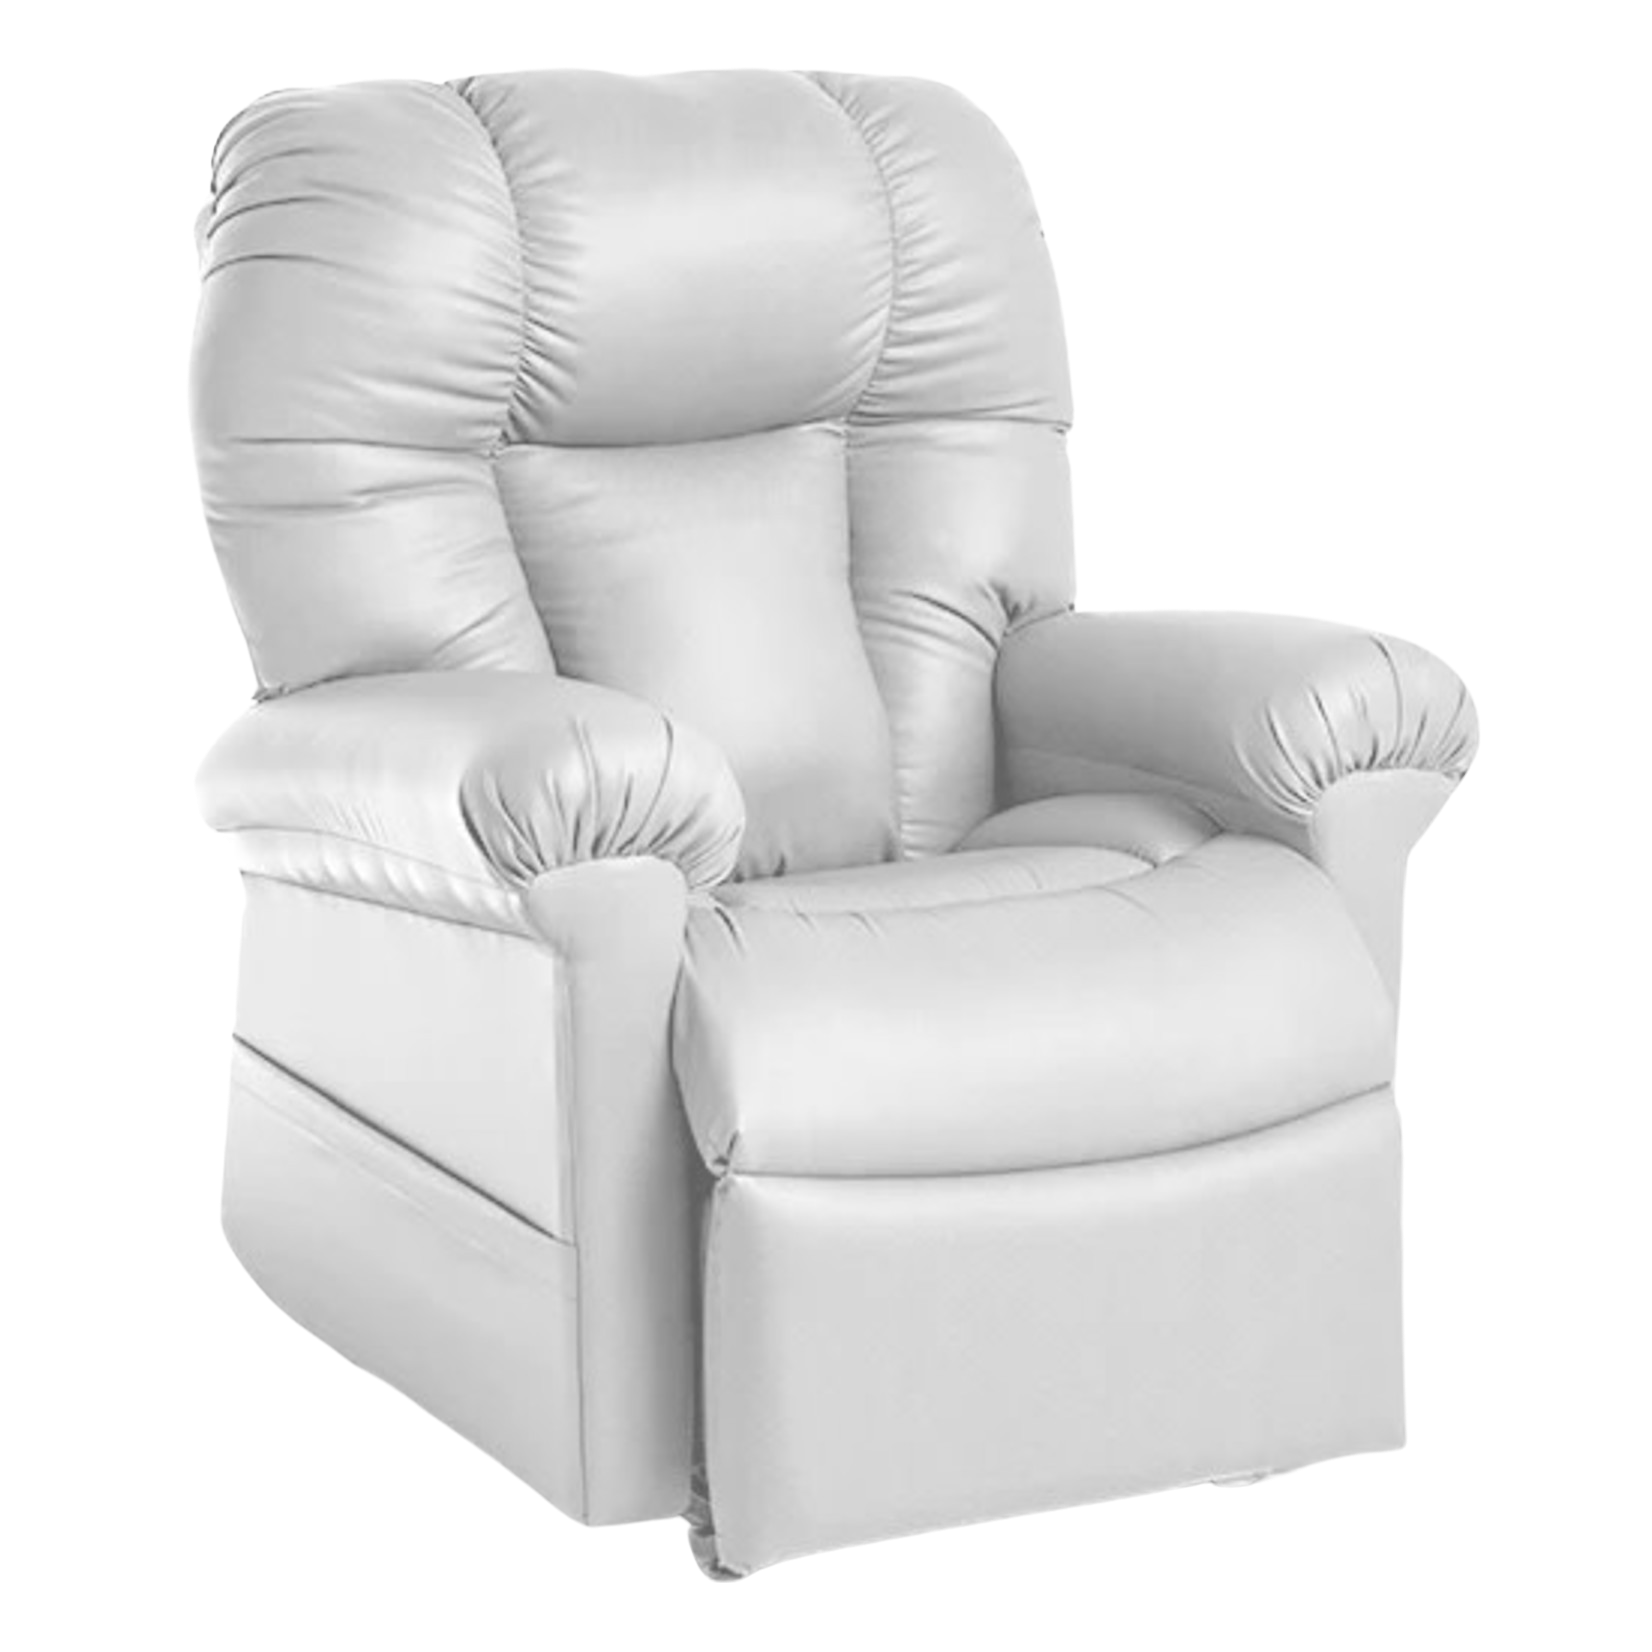 Journey Perfect Sleep Chair MiraLux Deluxe 5 Zone Lift with Heat and Massage 27202 New